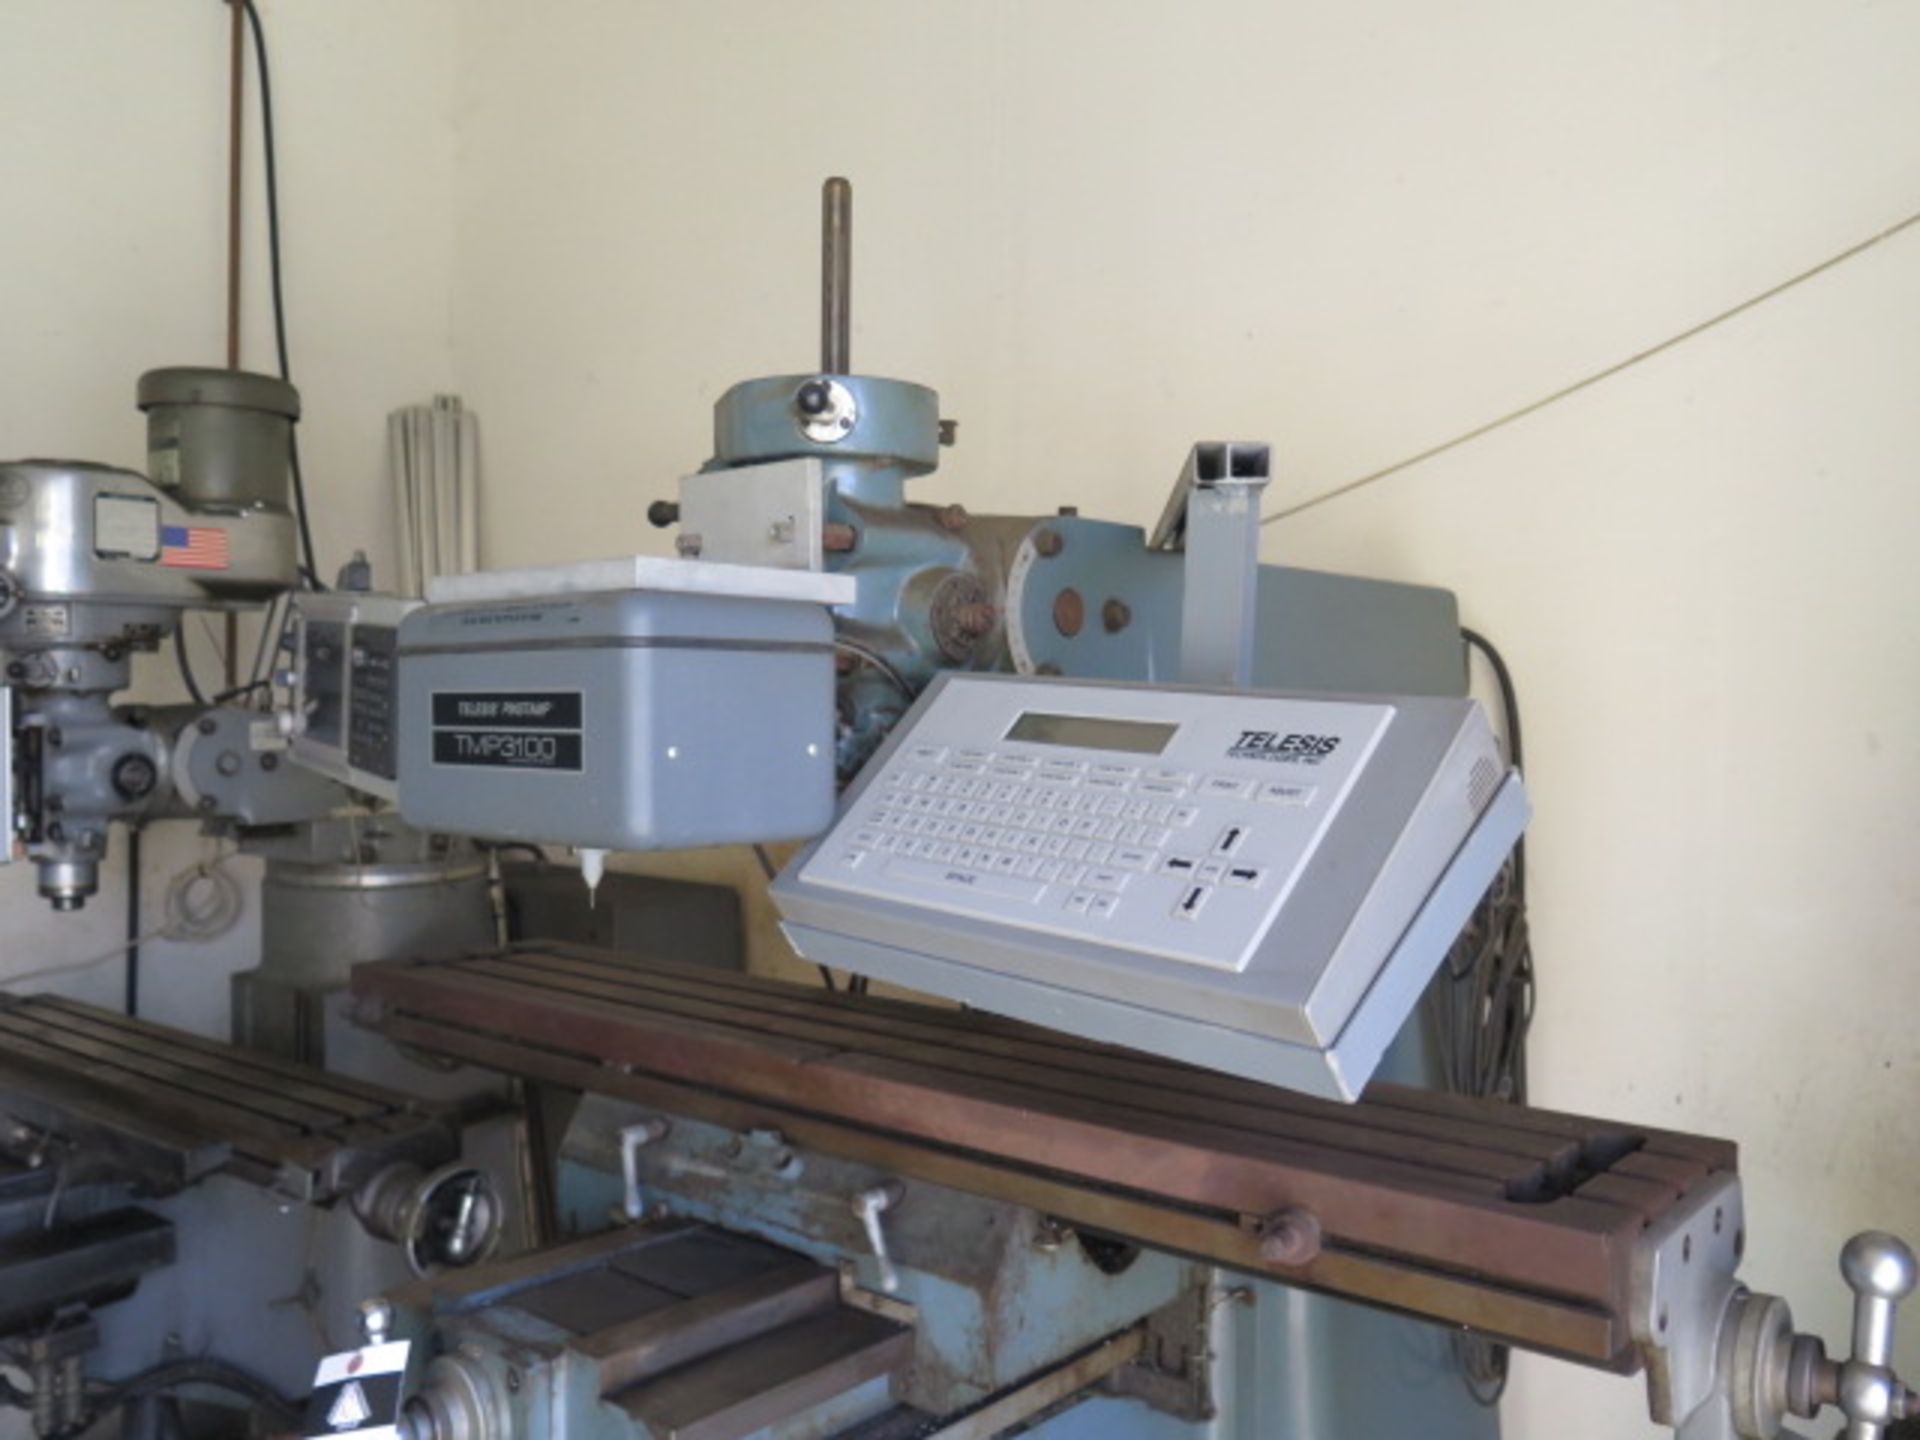 Telesis Pinstamp TMP3100 Pin Stamping Machine (On Vertical Mill Base) w/Telesis Controls, SOLD AS IS - Image 3 of 9